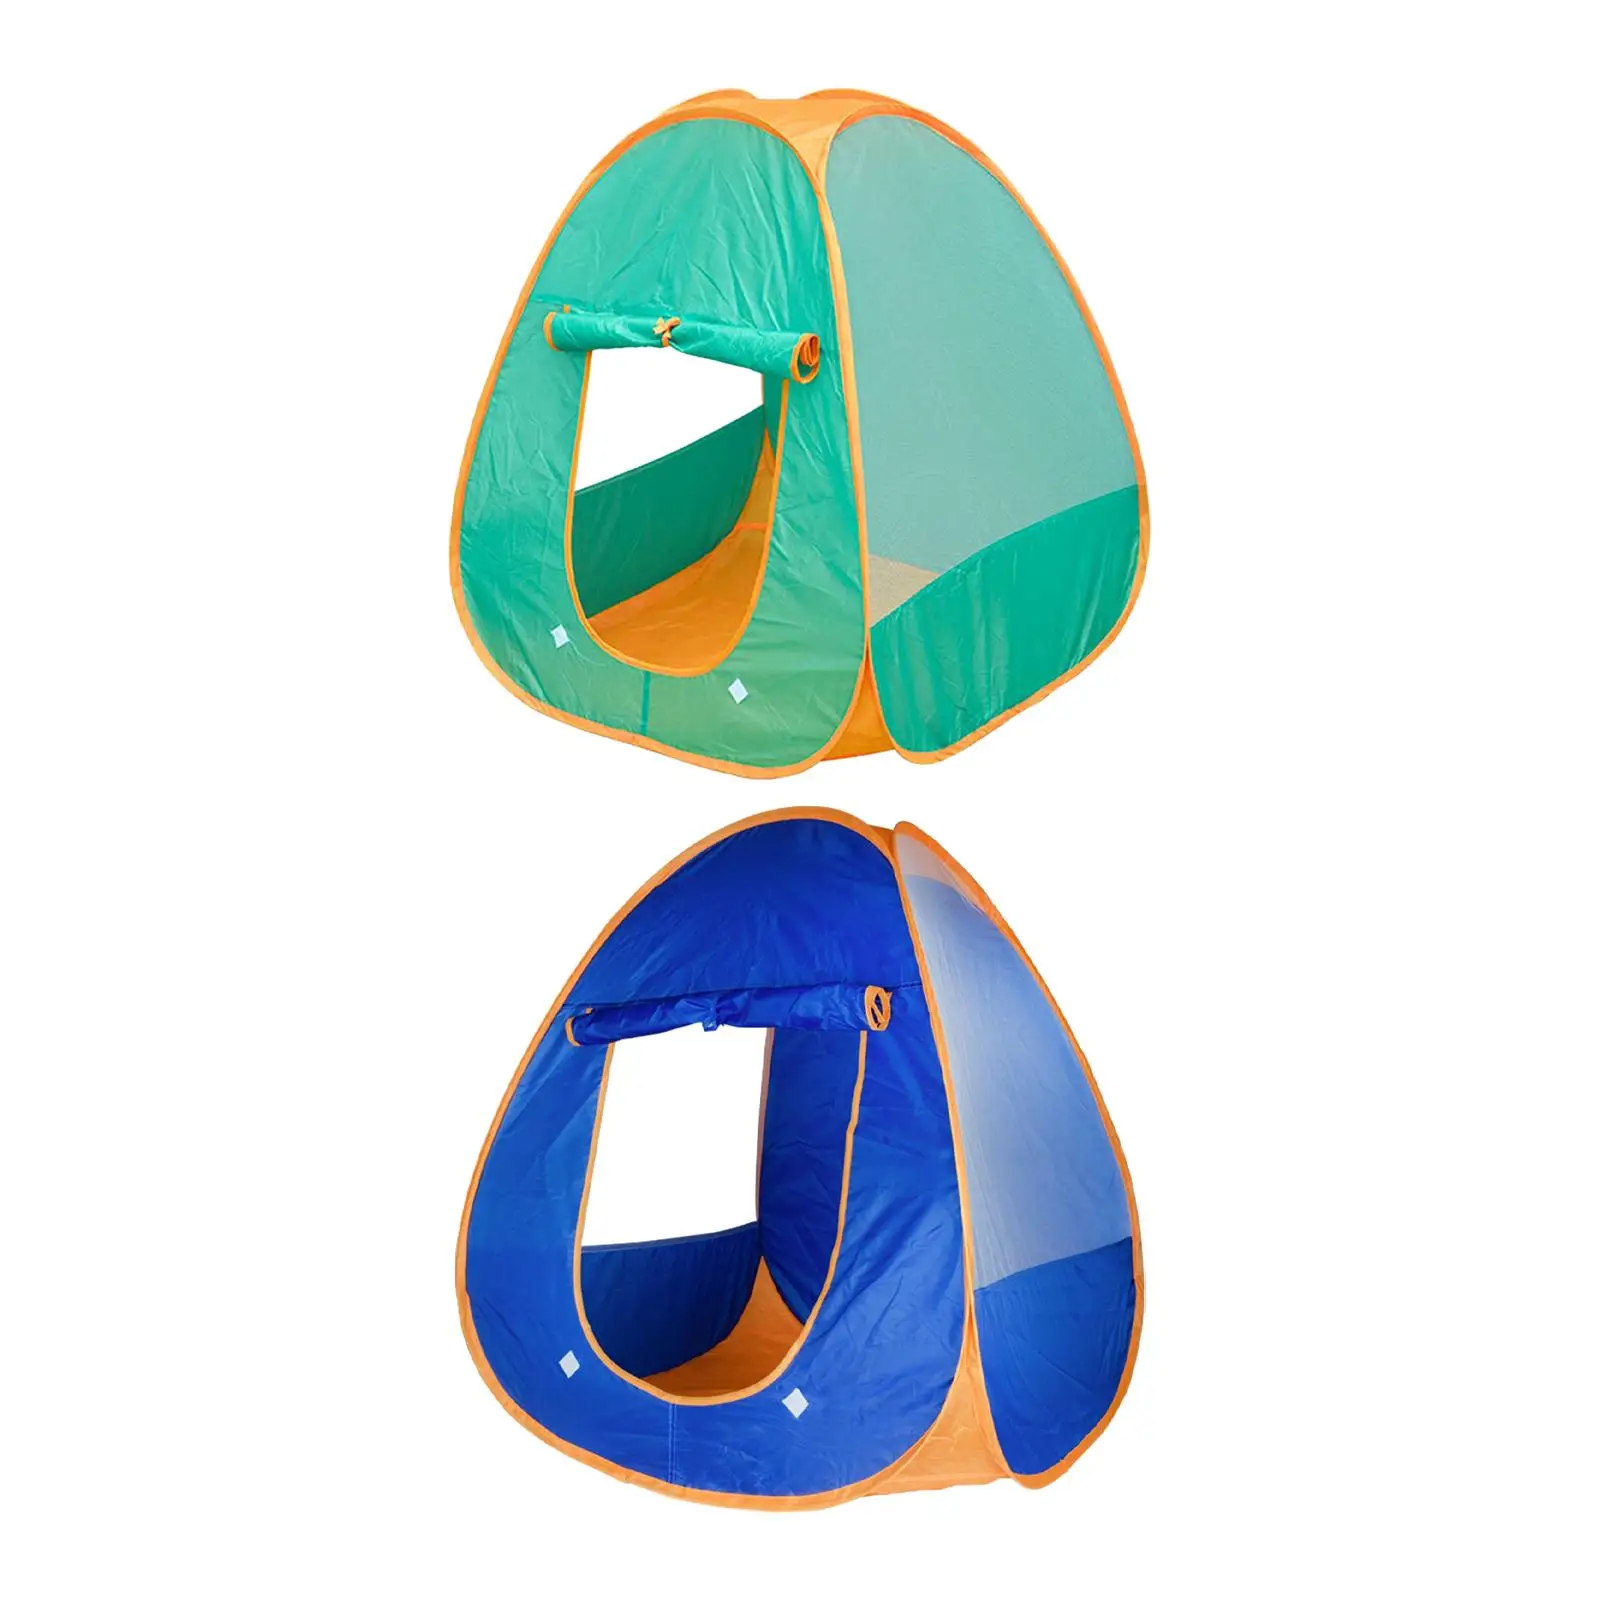 Children Play Tent Foldable Play Mat Pretend Play Lightweight Child Room Decor for Game Nursery Room Beach Party Camping